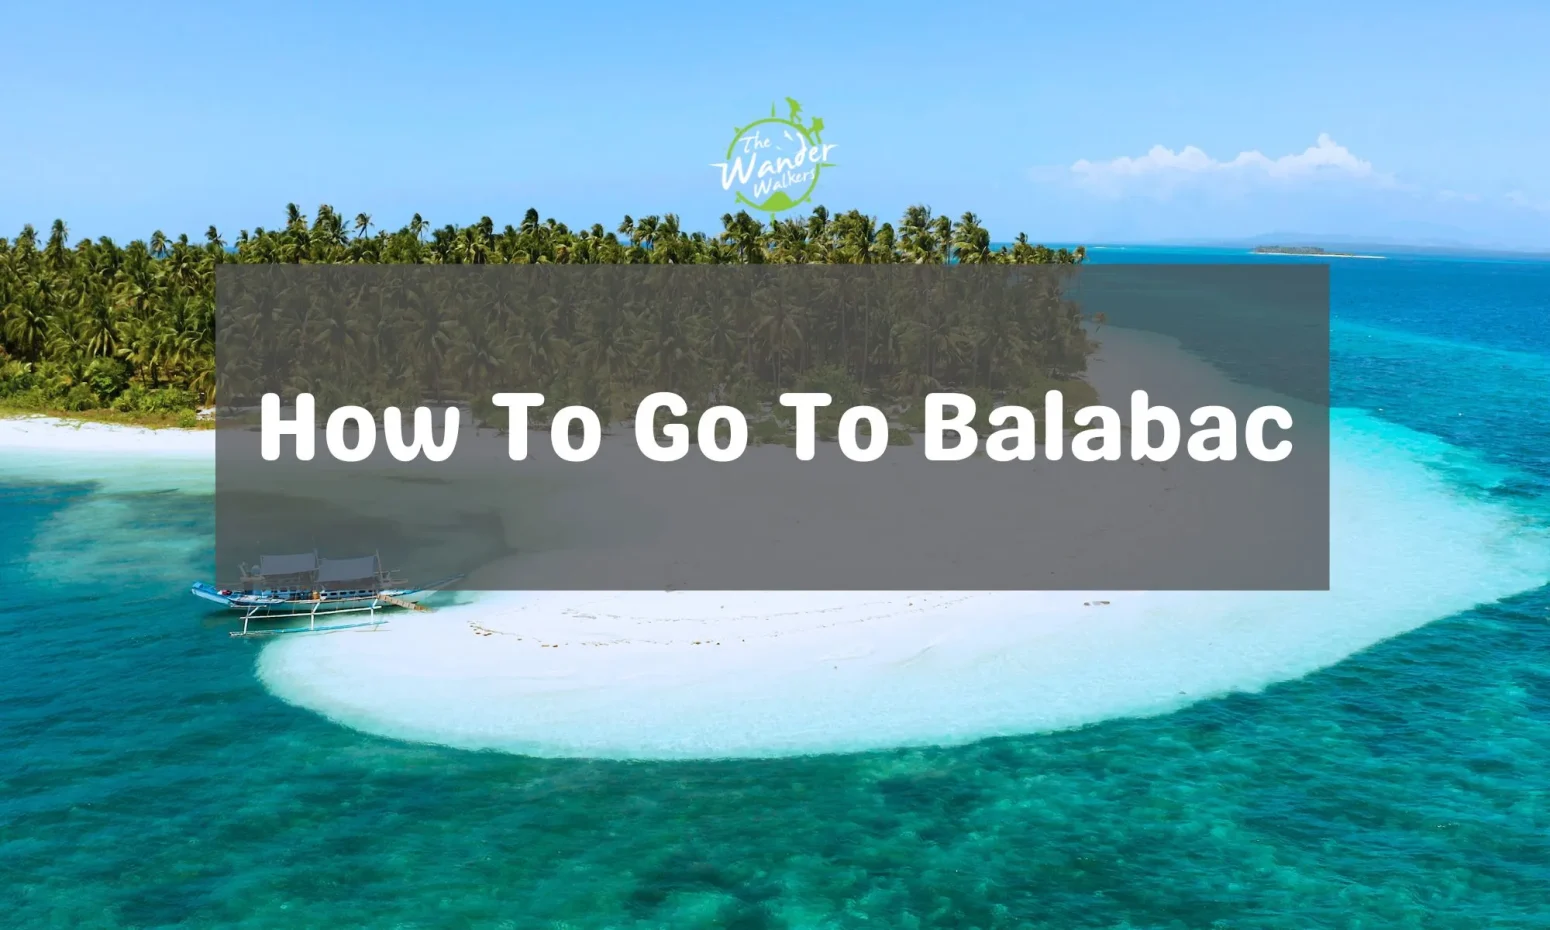 How To Go To Balabac - A Complete Guide